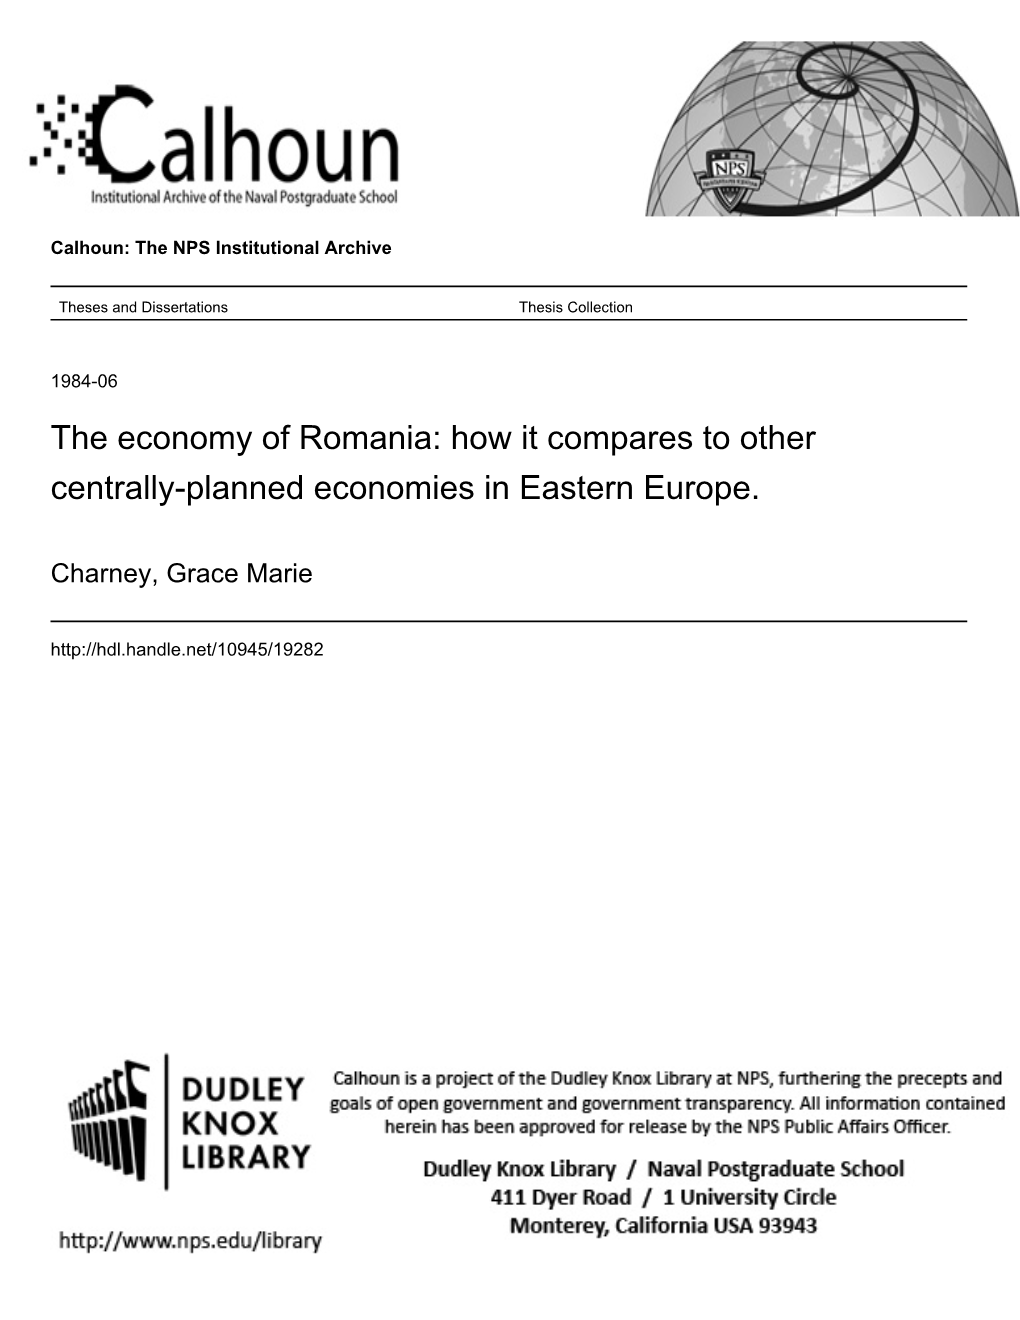 The Economy of Romania: How It Compares to Other Centrally-Planned Economies in Eastern Europe